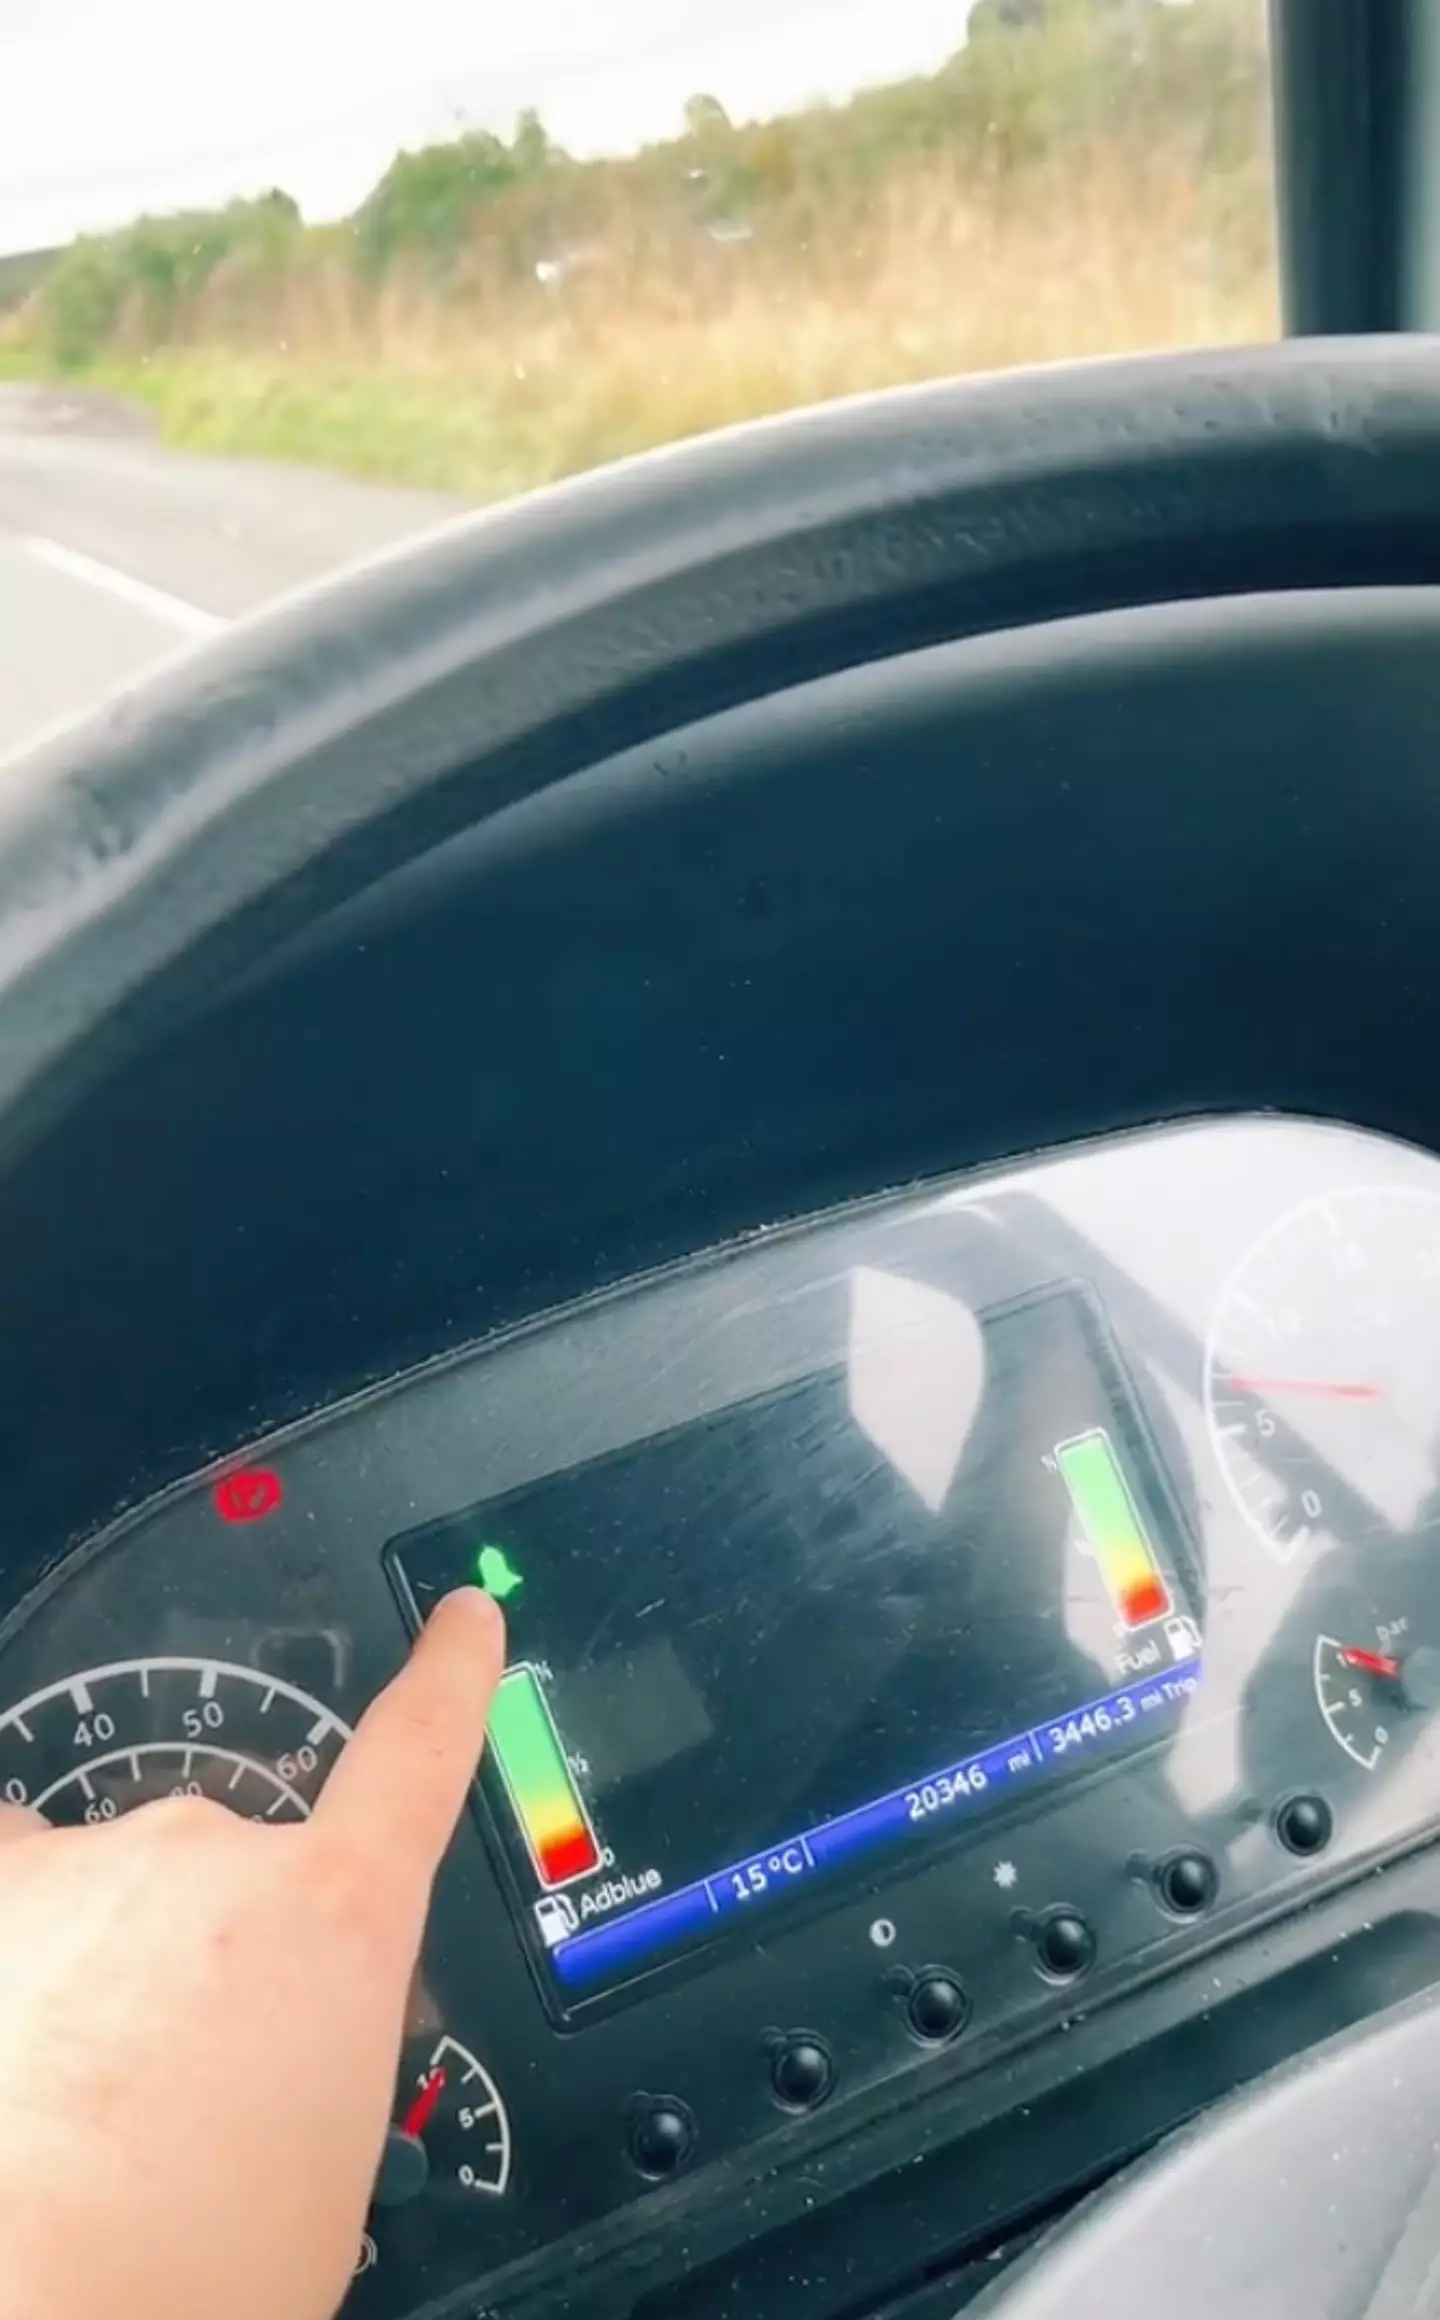 There's a symbol that appears on the dashboard (